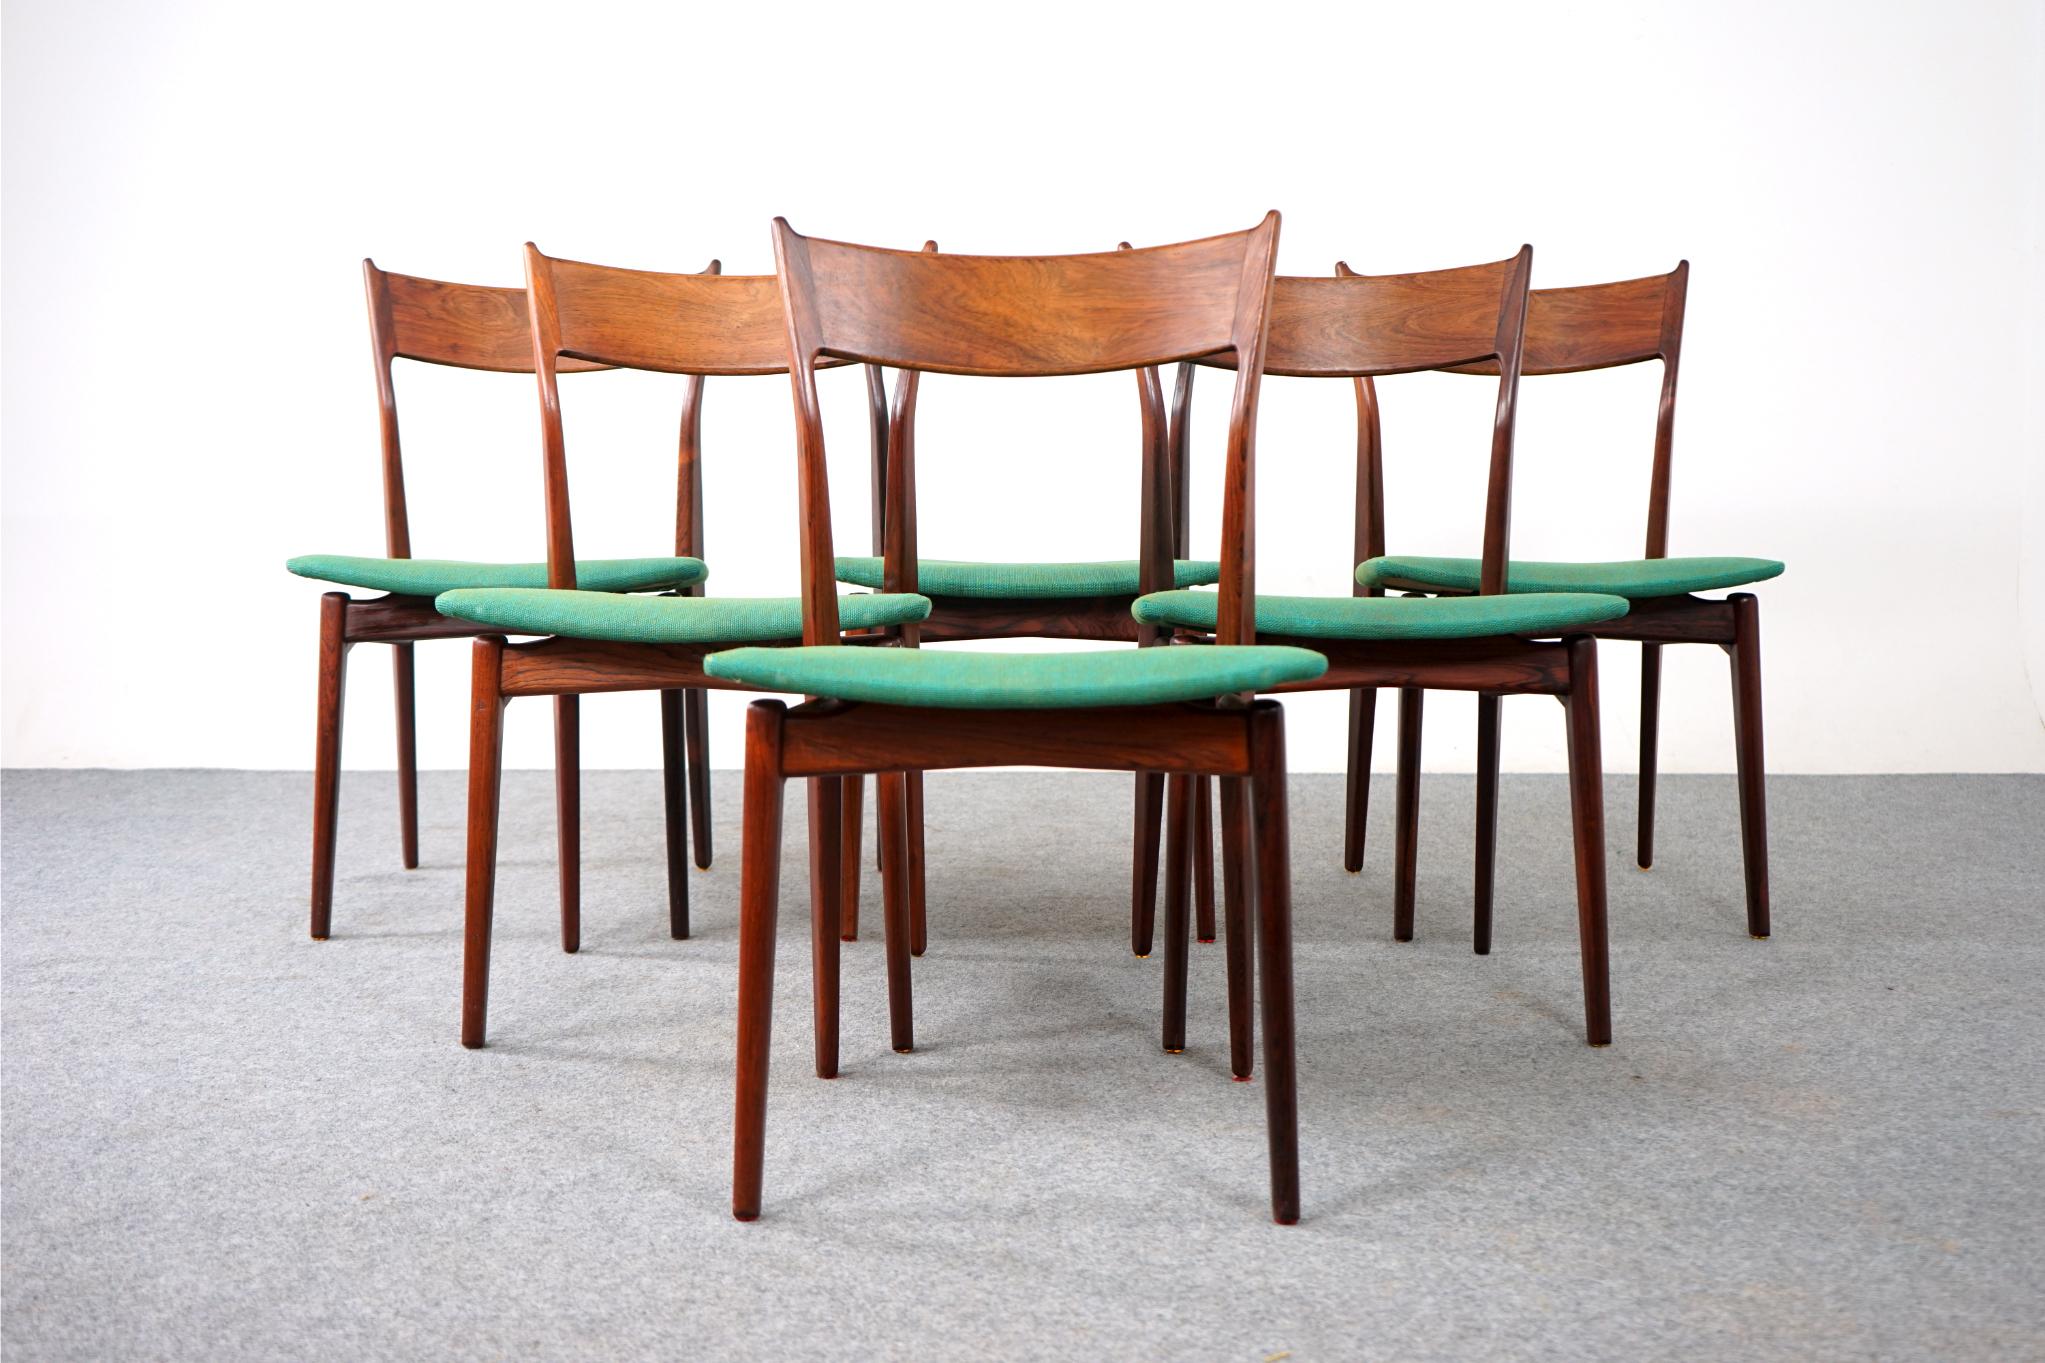 Rosewood Danish dining chairs by HP Hansen for Randers, circa 1960's. Robust, yet refined. Sculptural lines and floating seat add an air of lightness and elegance to the stunning frame. Beautifully curved backrests and generous seats provide support